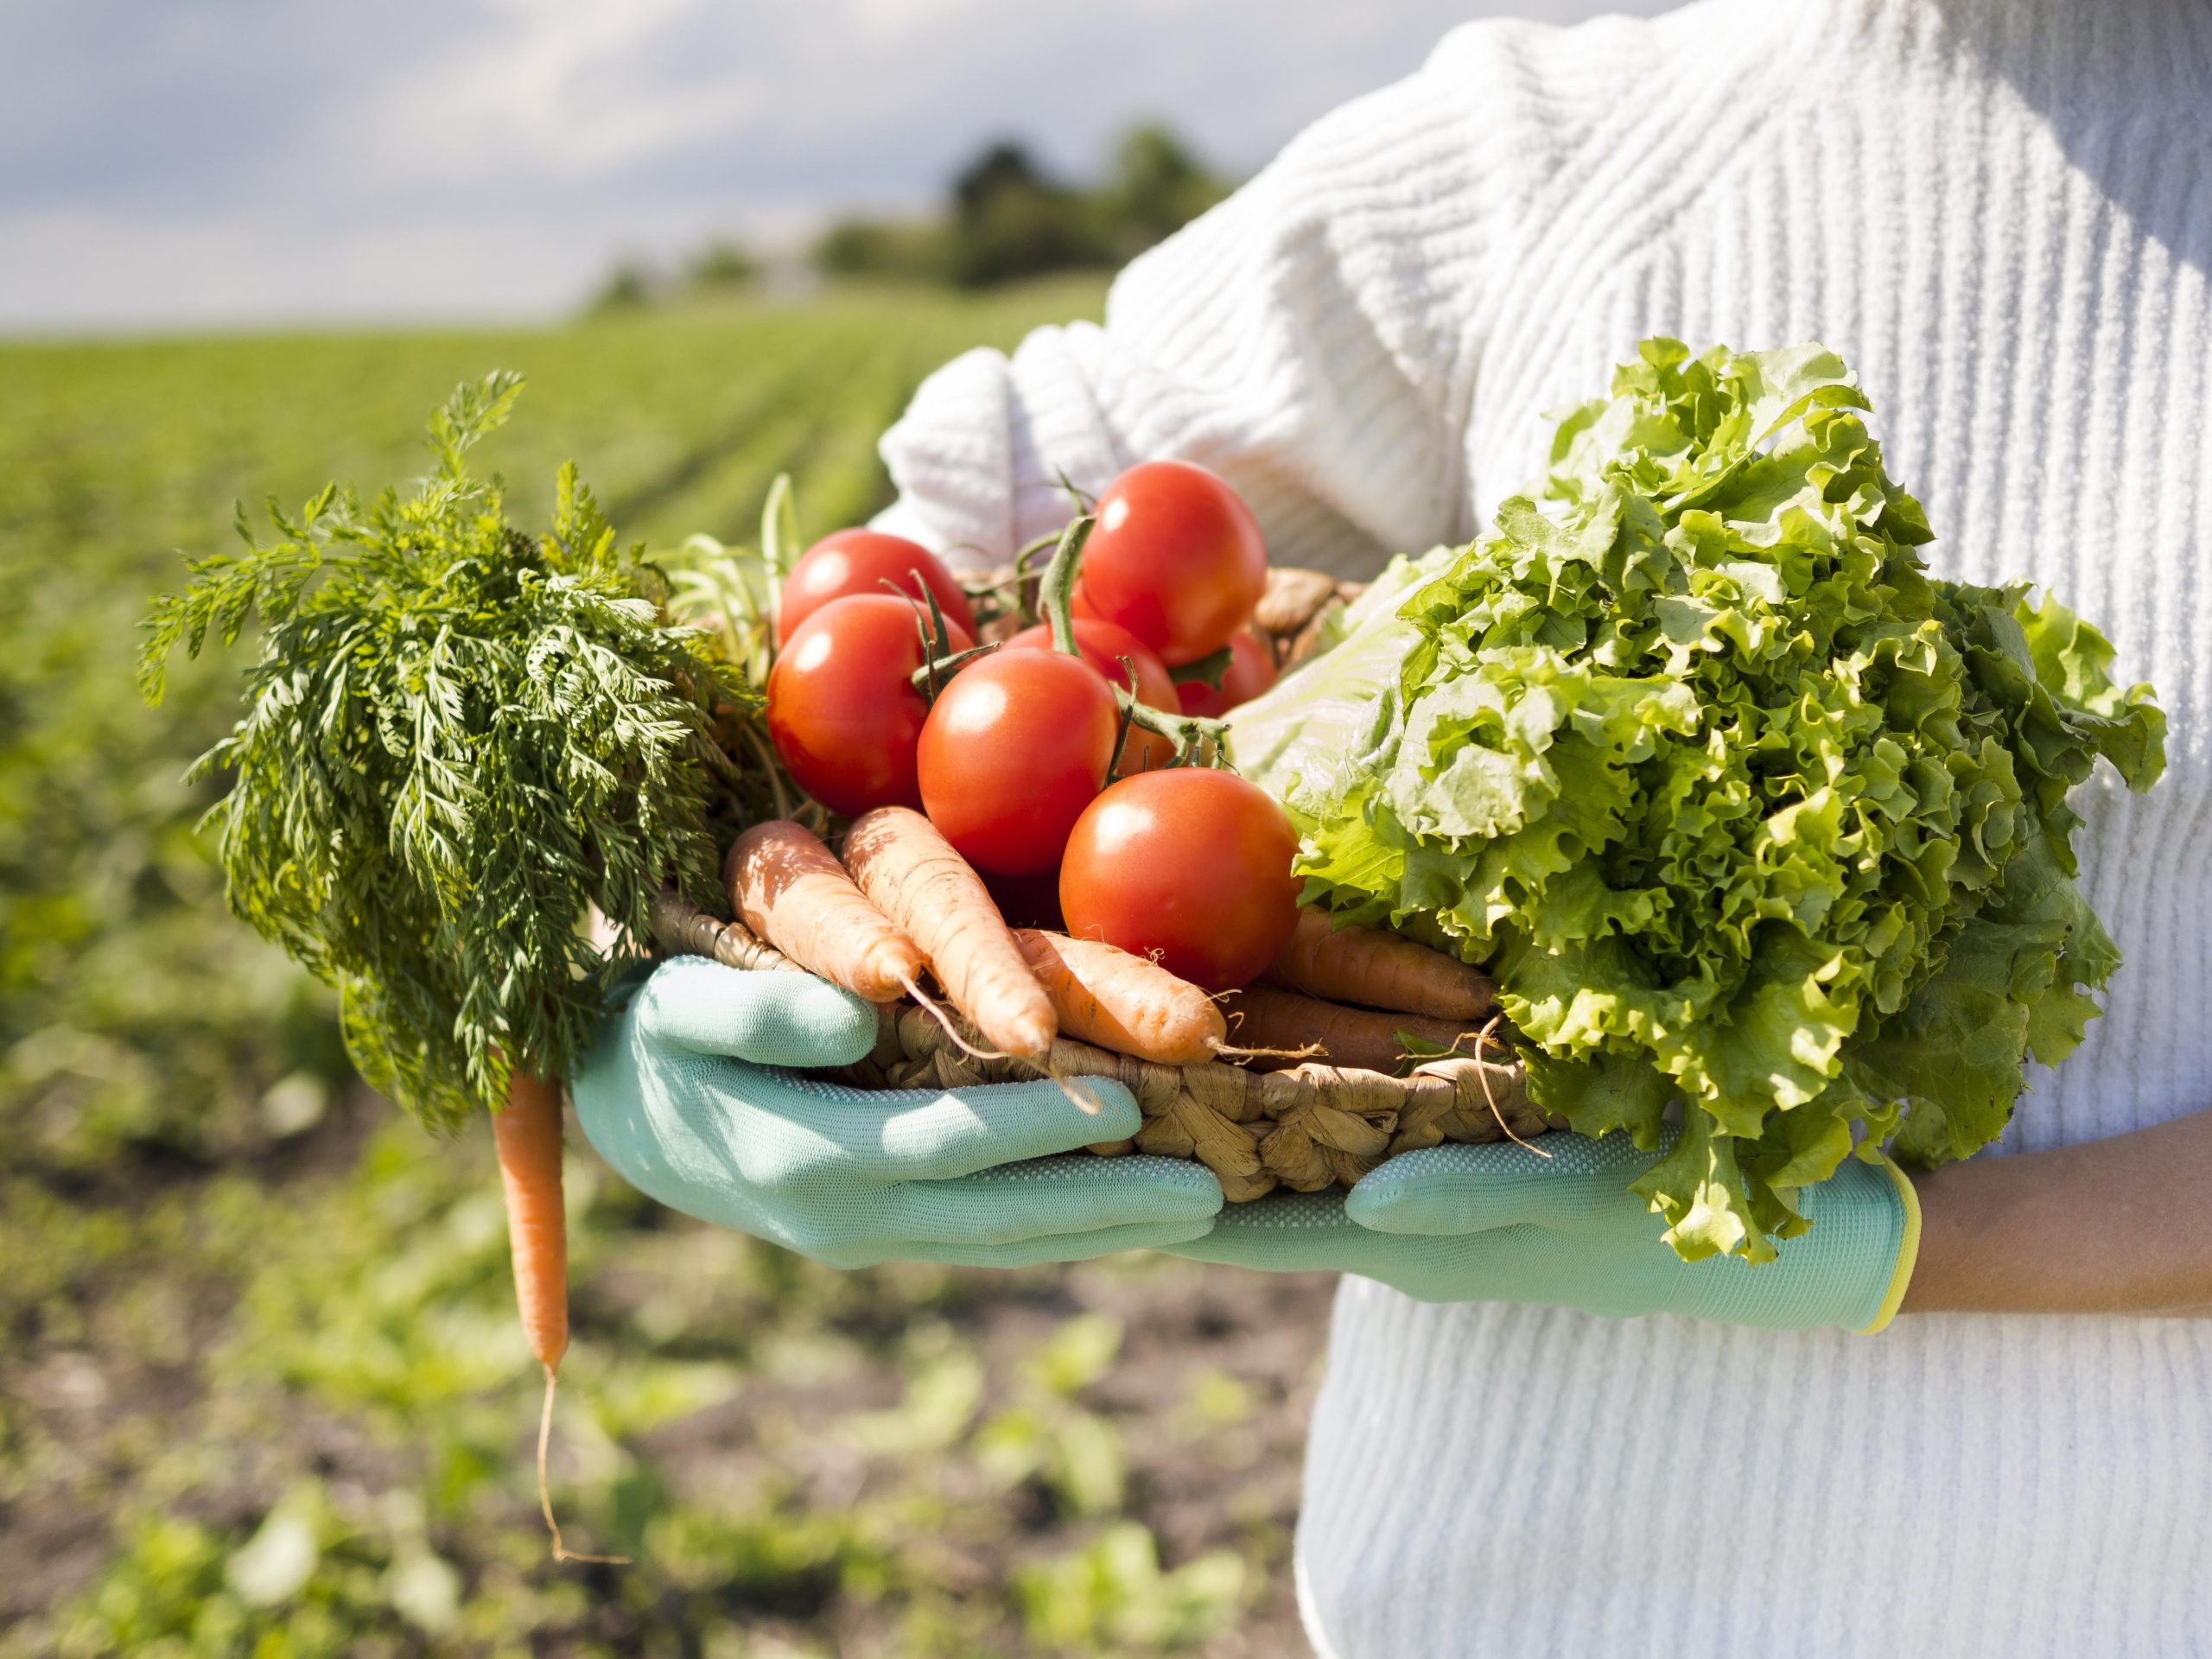 What are the advantages of subsistence farming?